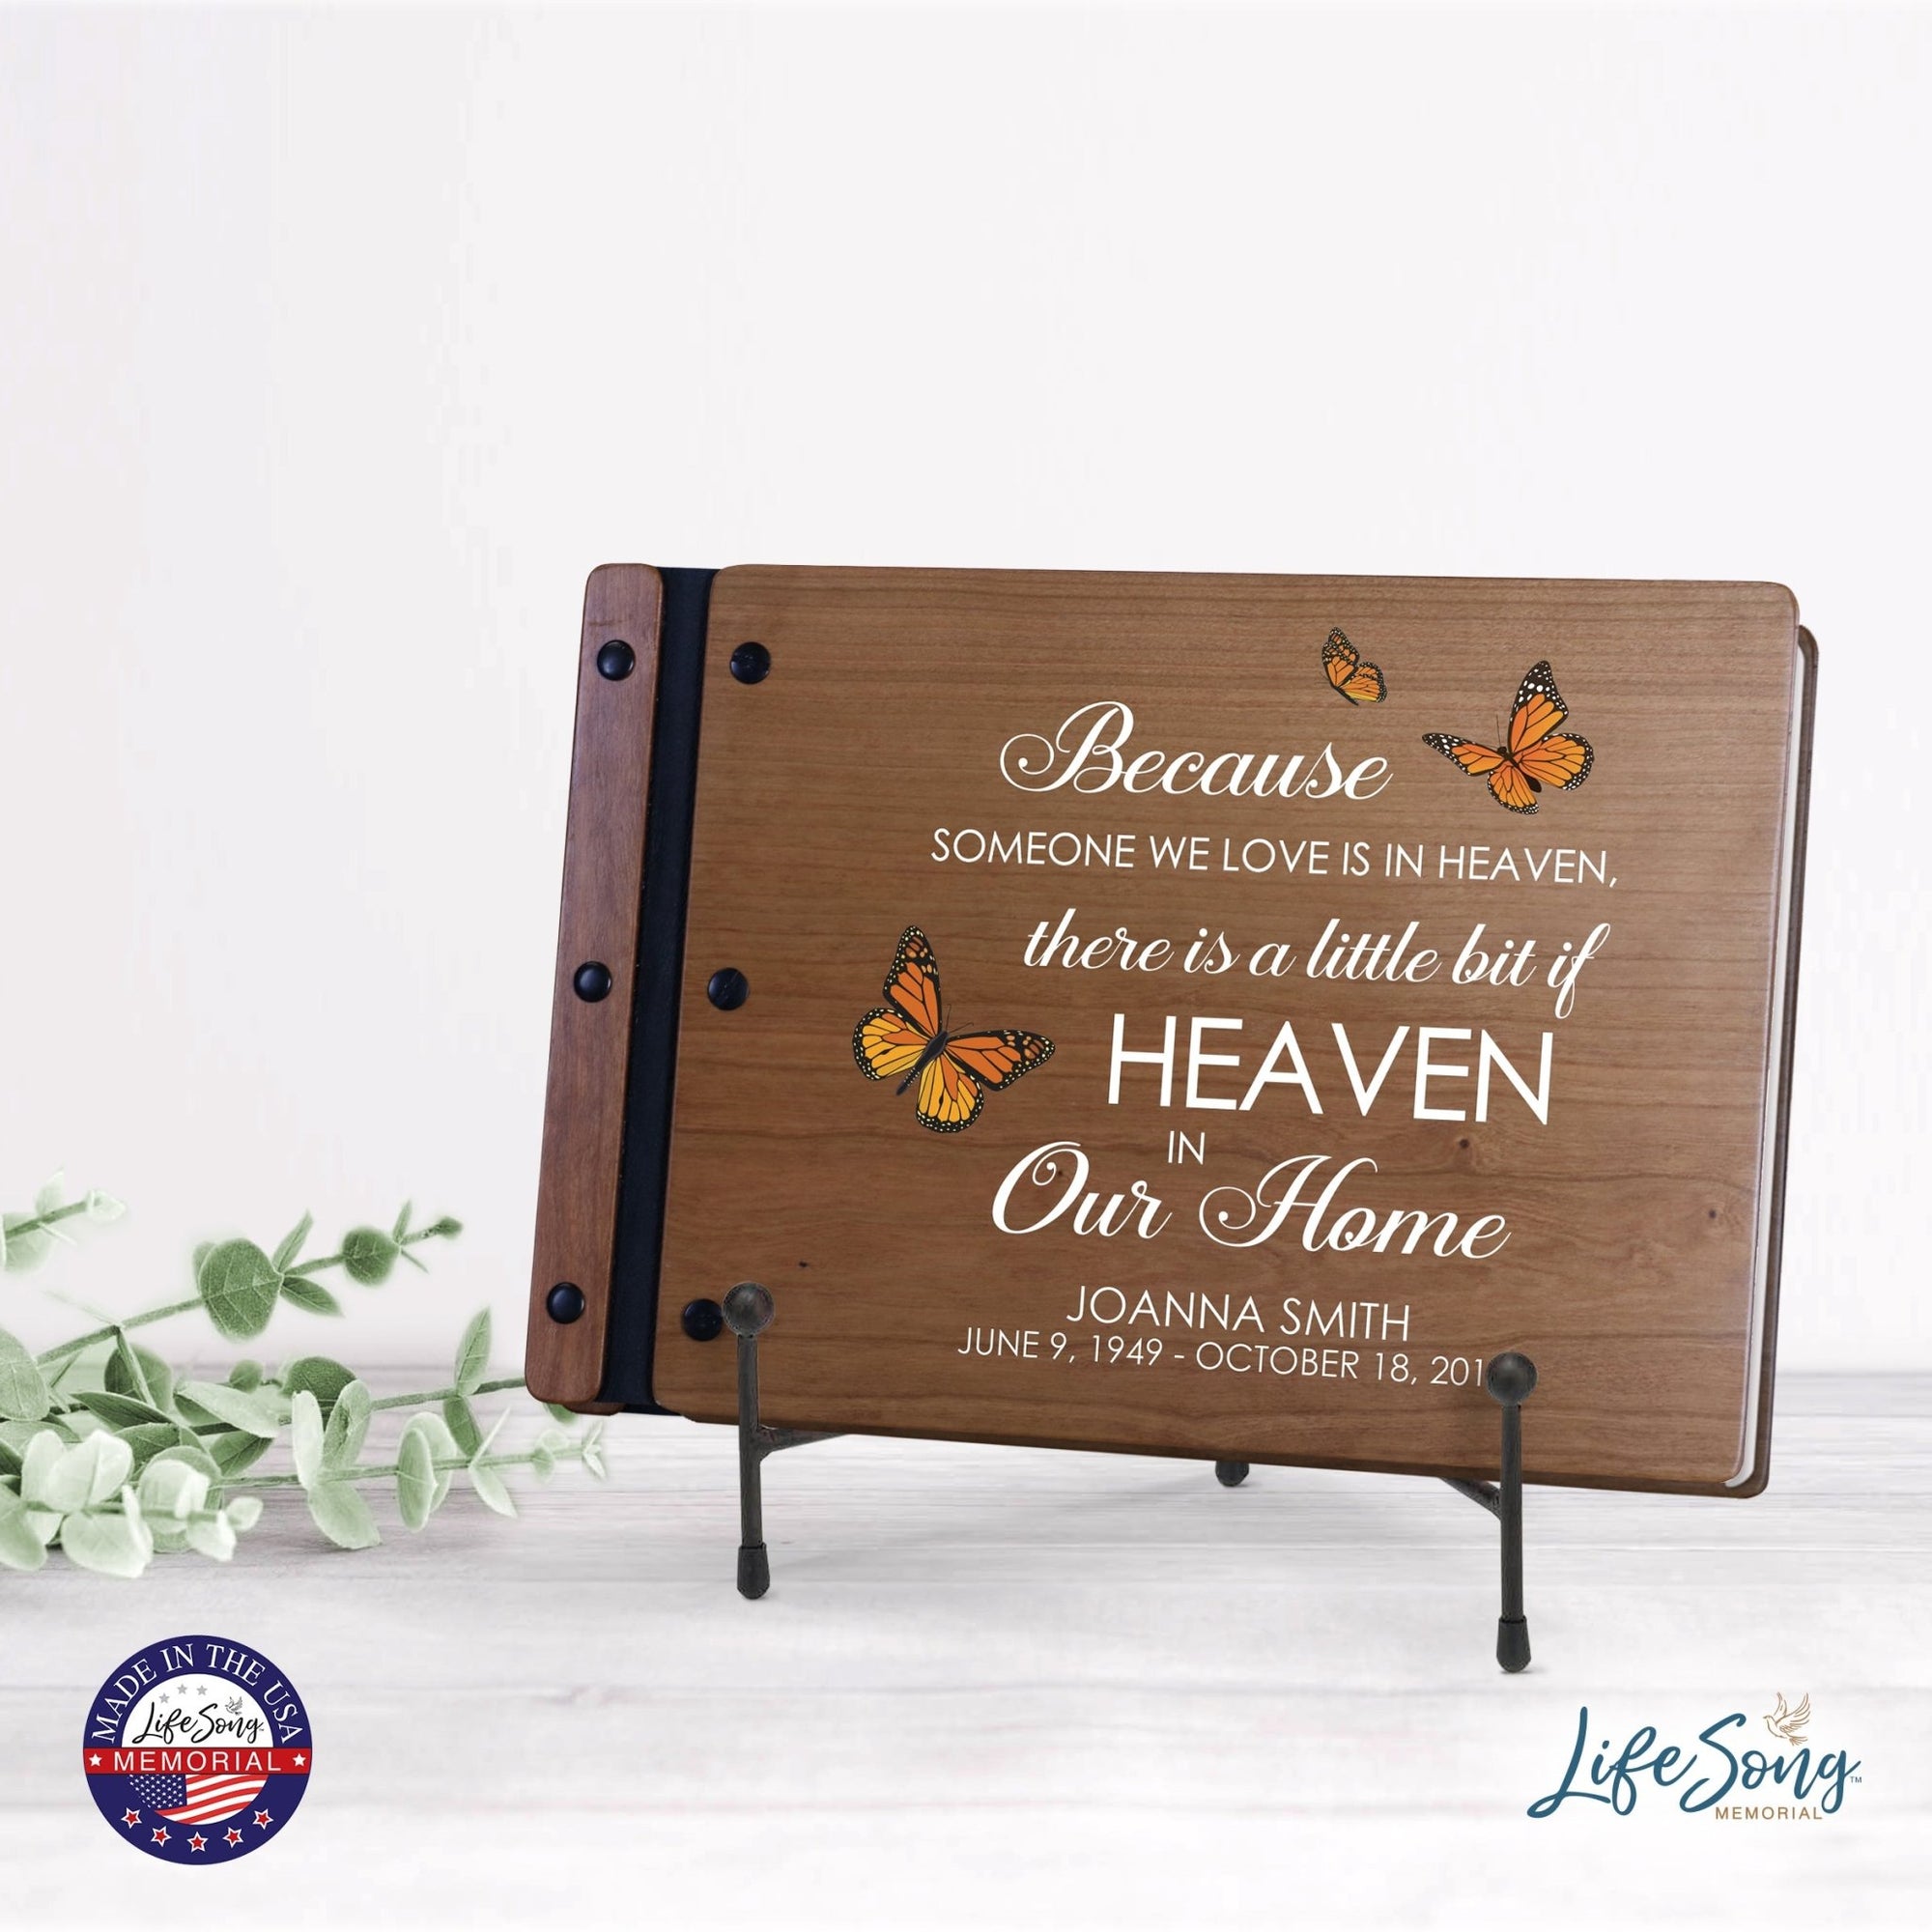 Personalized Medium Wooden Memorial Guestbook 12.375x8.5 - Because Someone We Love (Cherry) - LifeSong Milestones